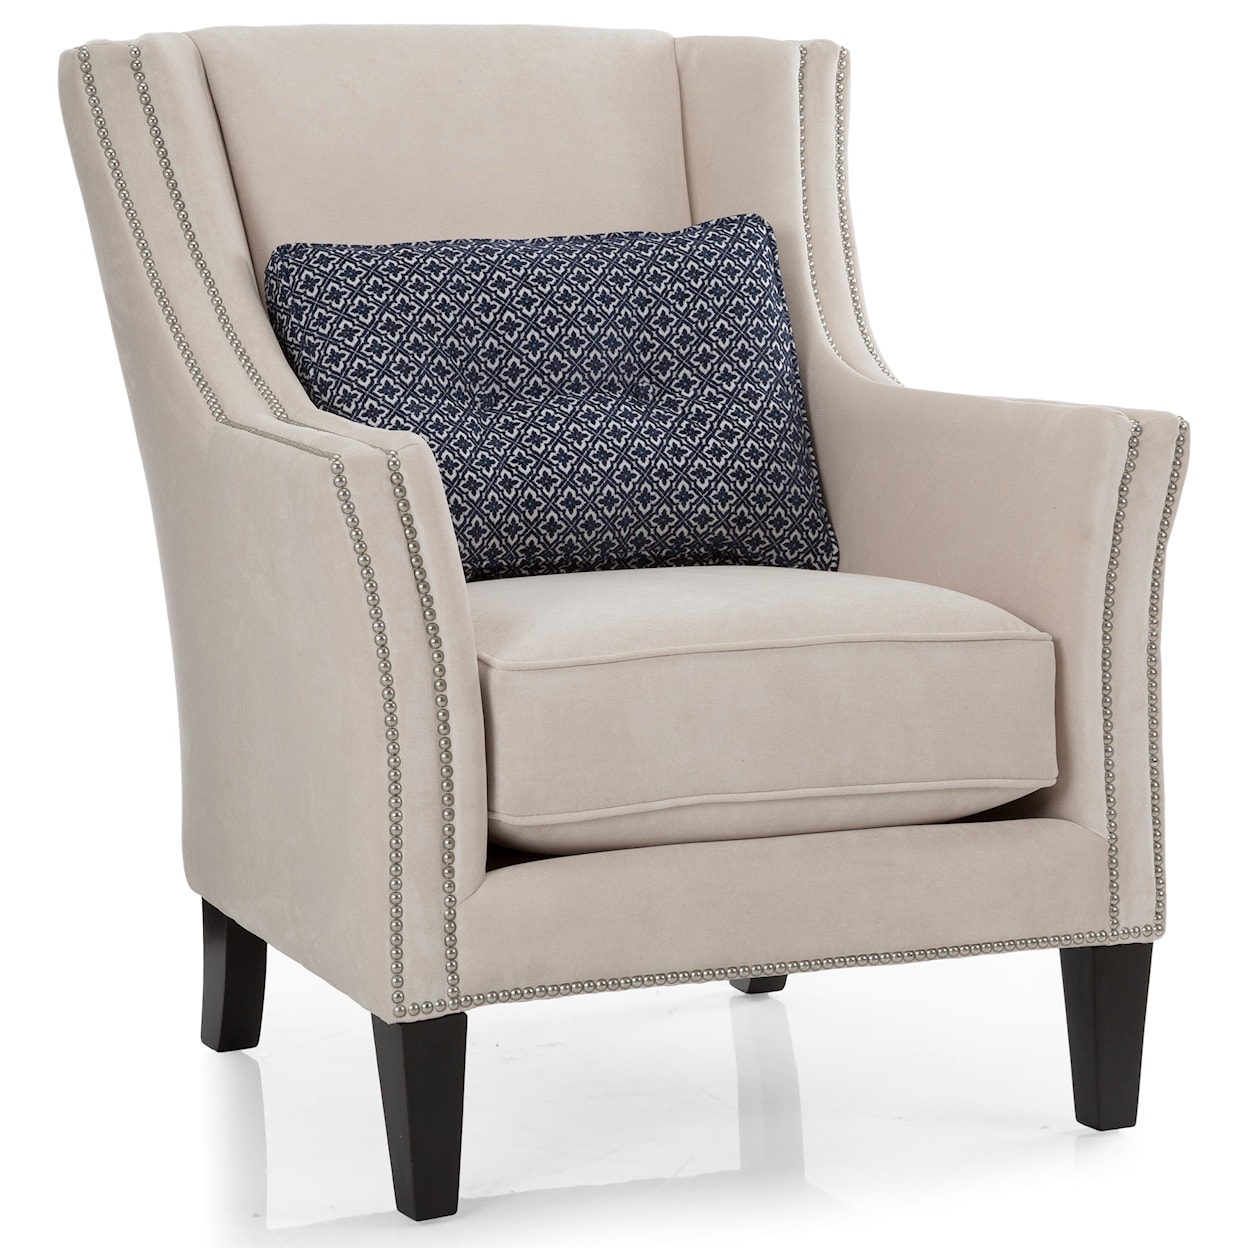 Decor-Rest Upholstered Accents Track Arm Chair